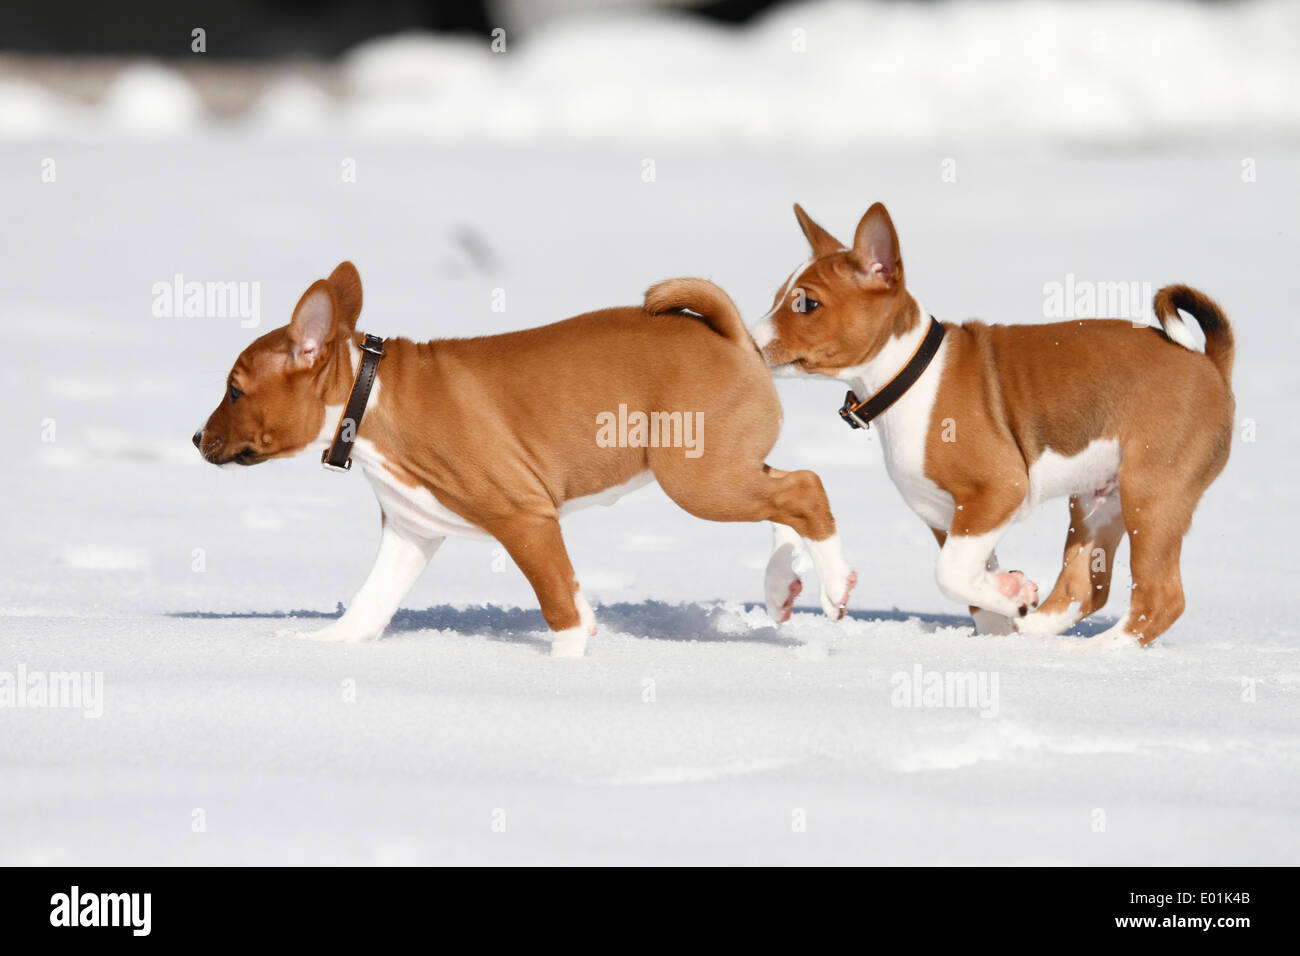 Basenji. Two puppies running on snow. Germany Stock Photo